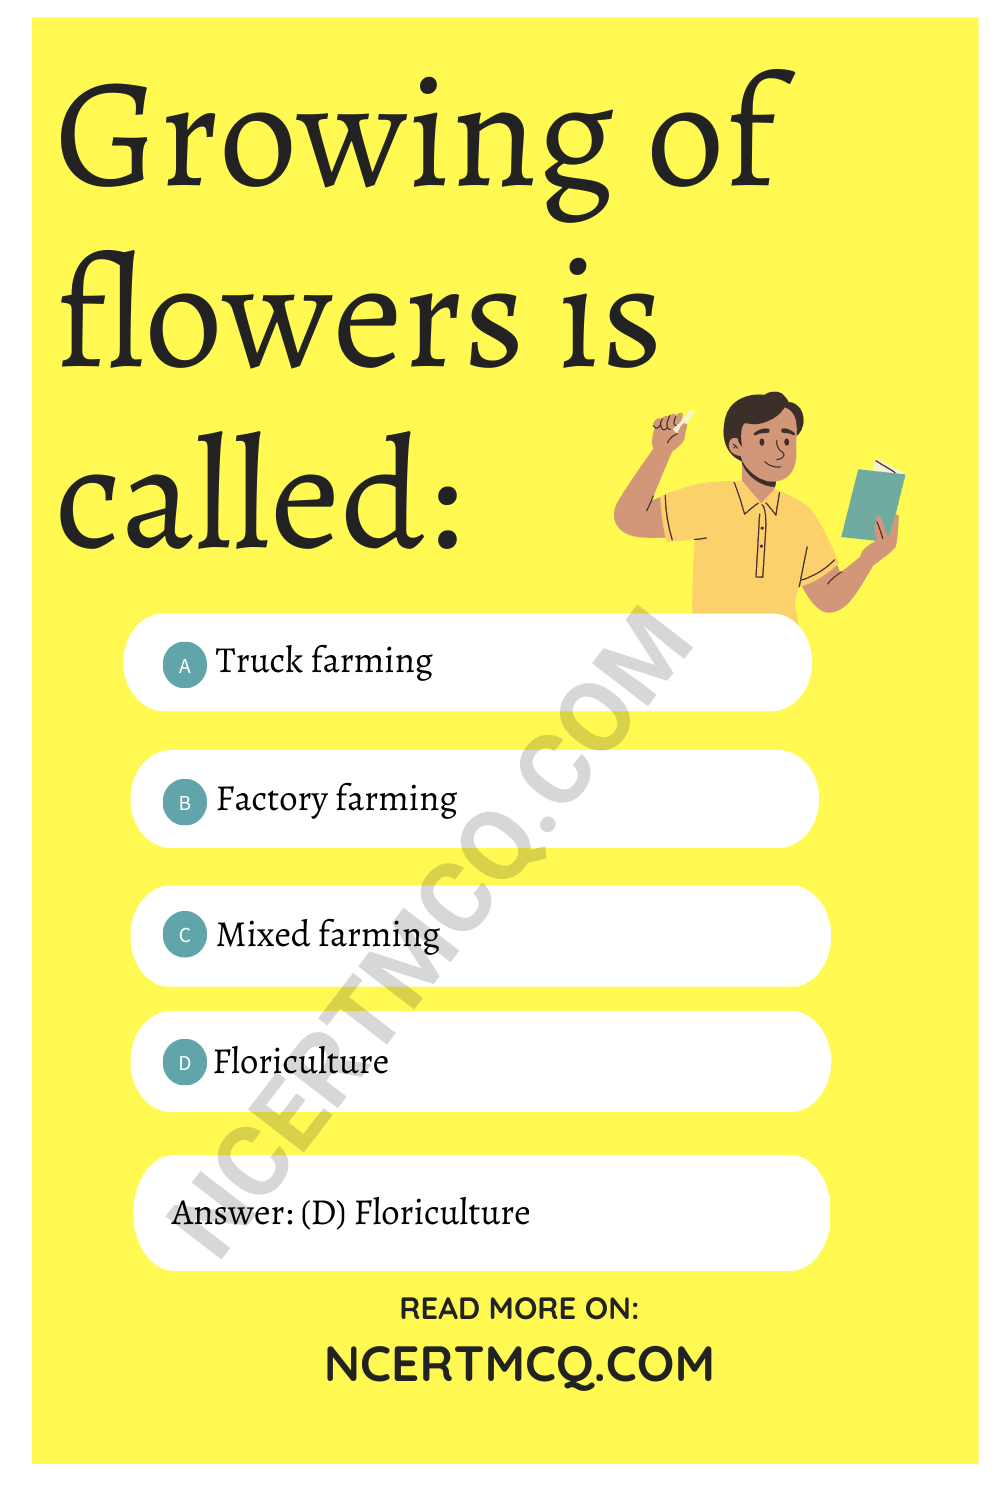 Growing of flowers is called: